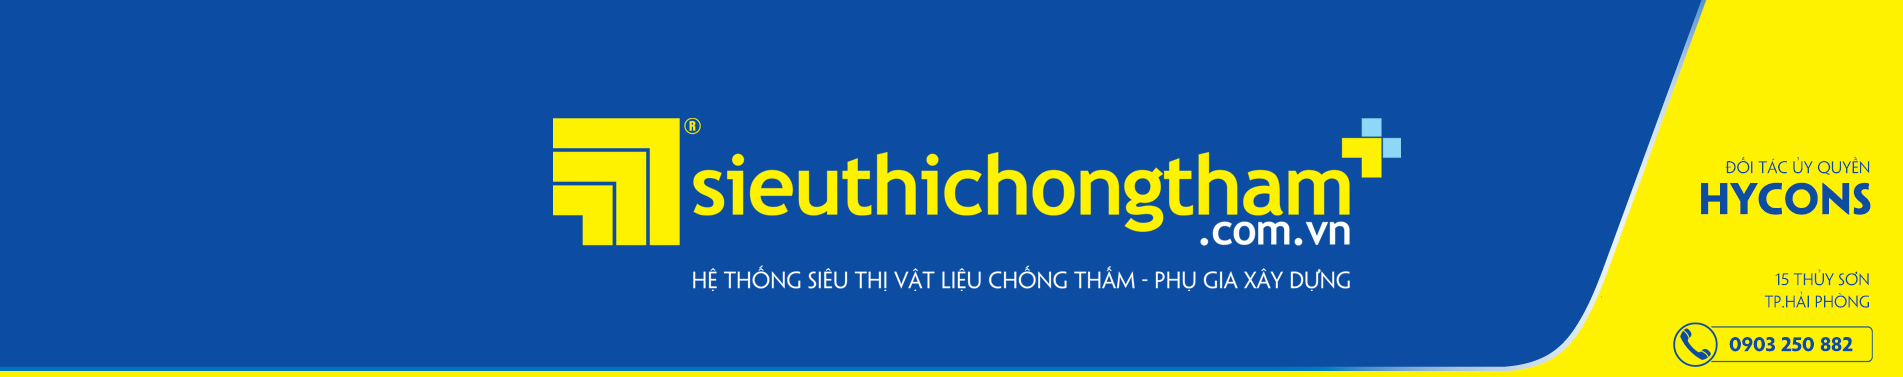 HYCONS Thuy Son Banner